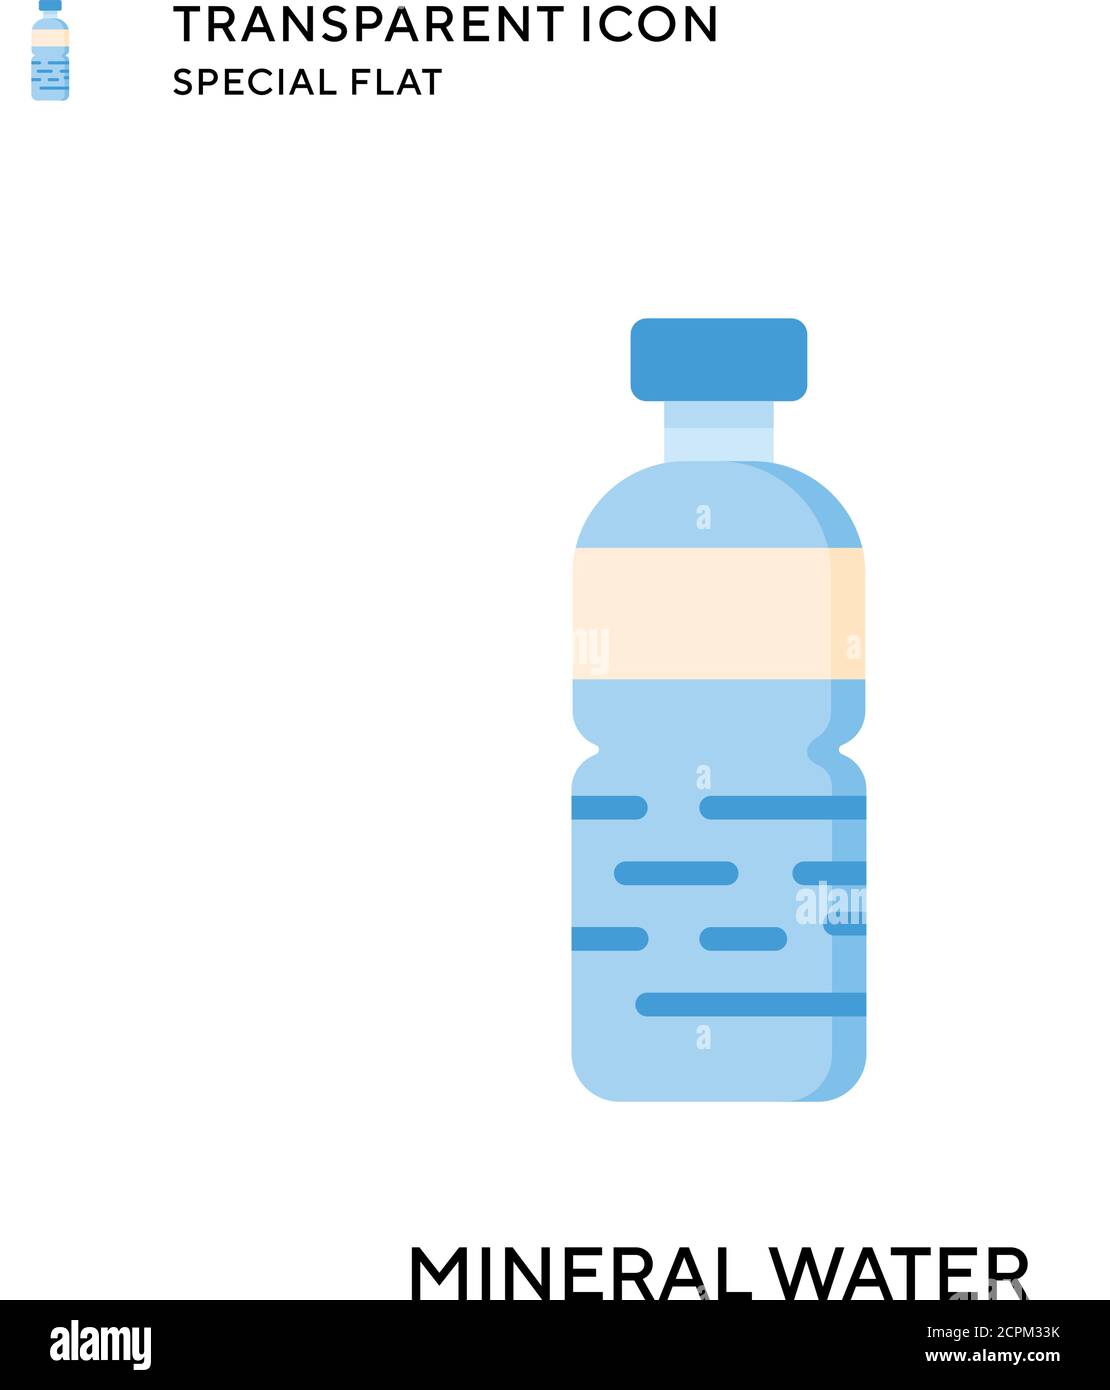 Mineral water vector icon. Flat style illustration. EPS 10 vector. Stock Vector